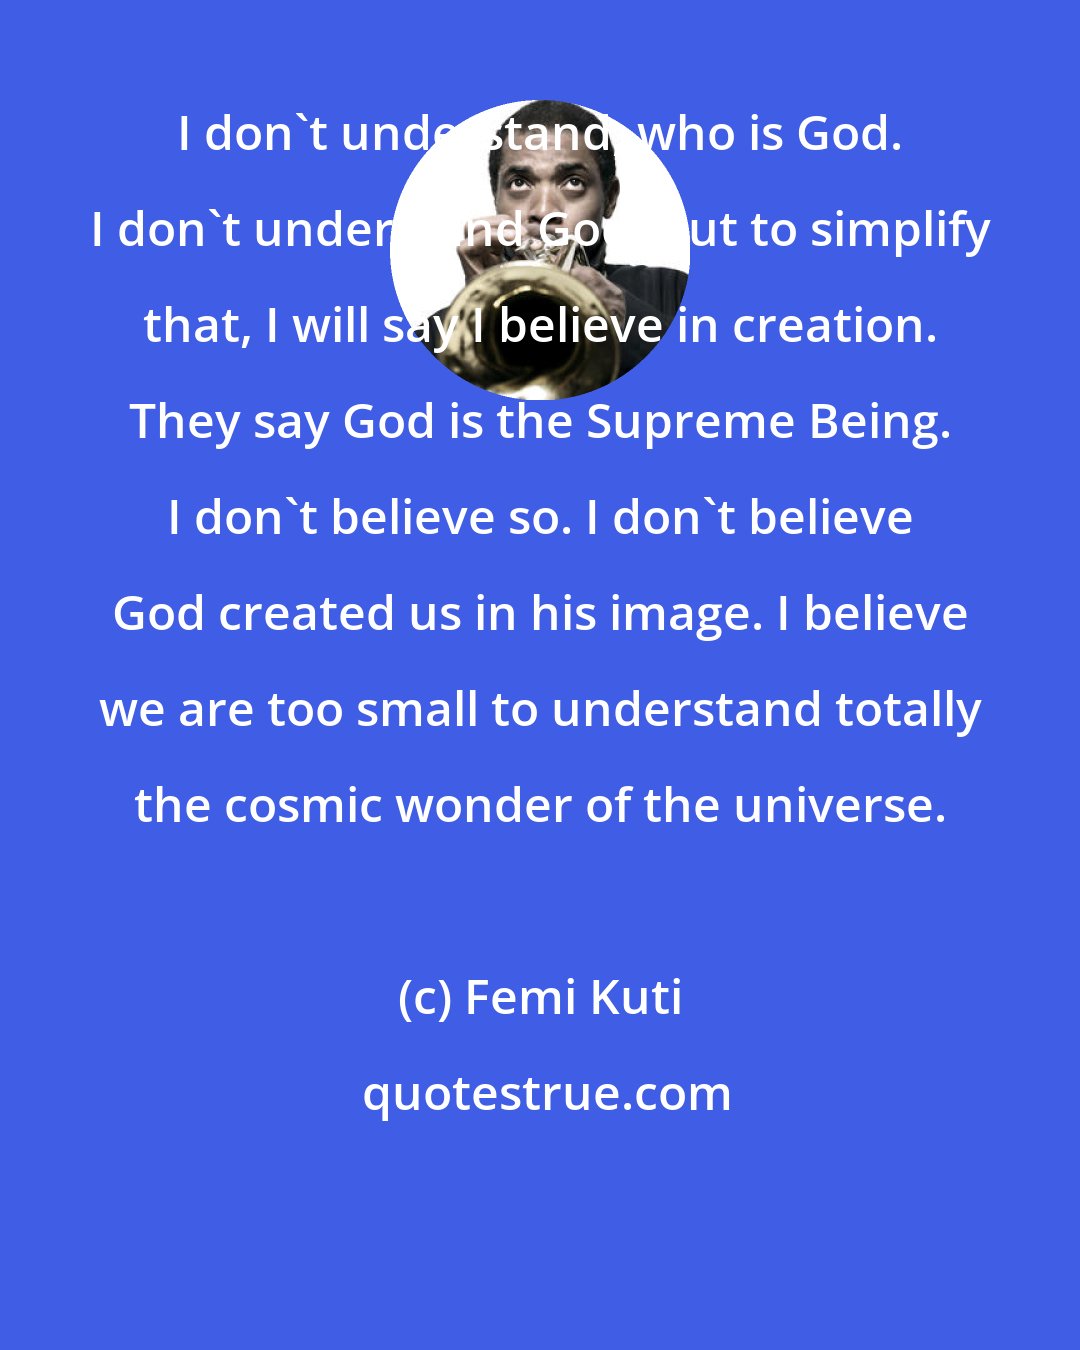 Femi Kuti: I don't understand, who is God. I don't understand God. But to simplify that, I will say I believe in creation. They say God is the Supreme Being. I don't believe so. I don't believe God created us in his image. I believe we are too small to understand totally the cosmic wonder of the universe.